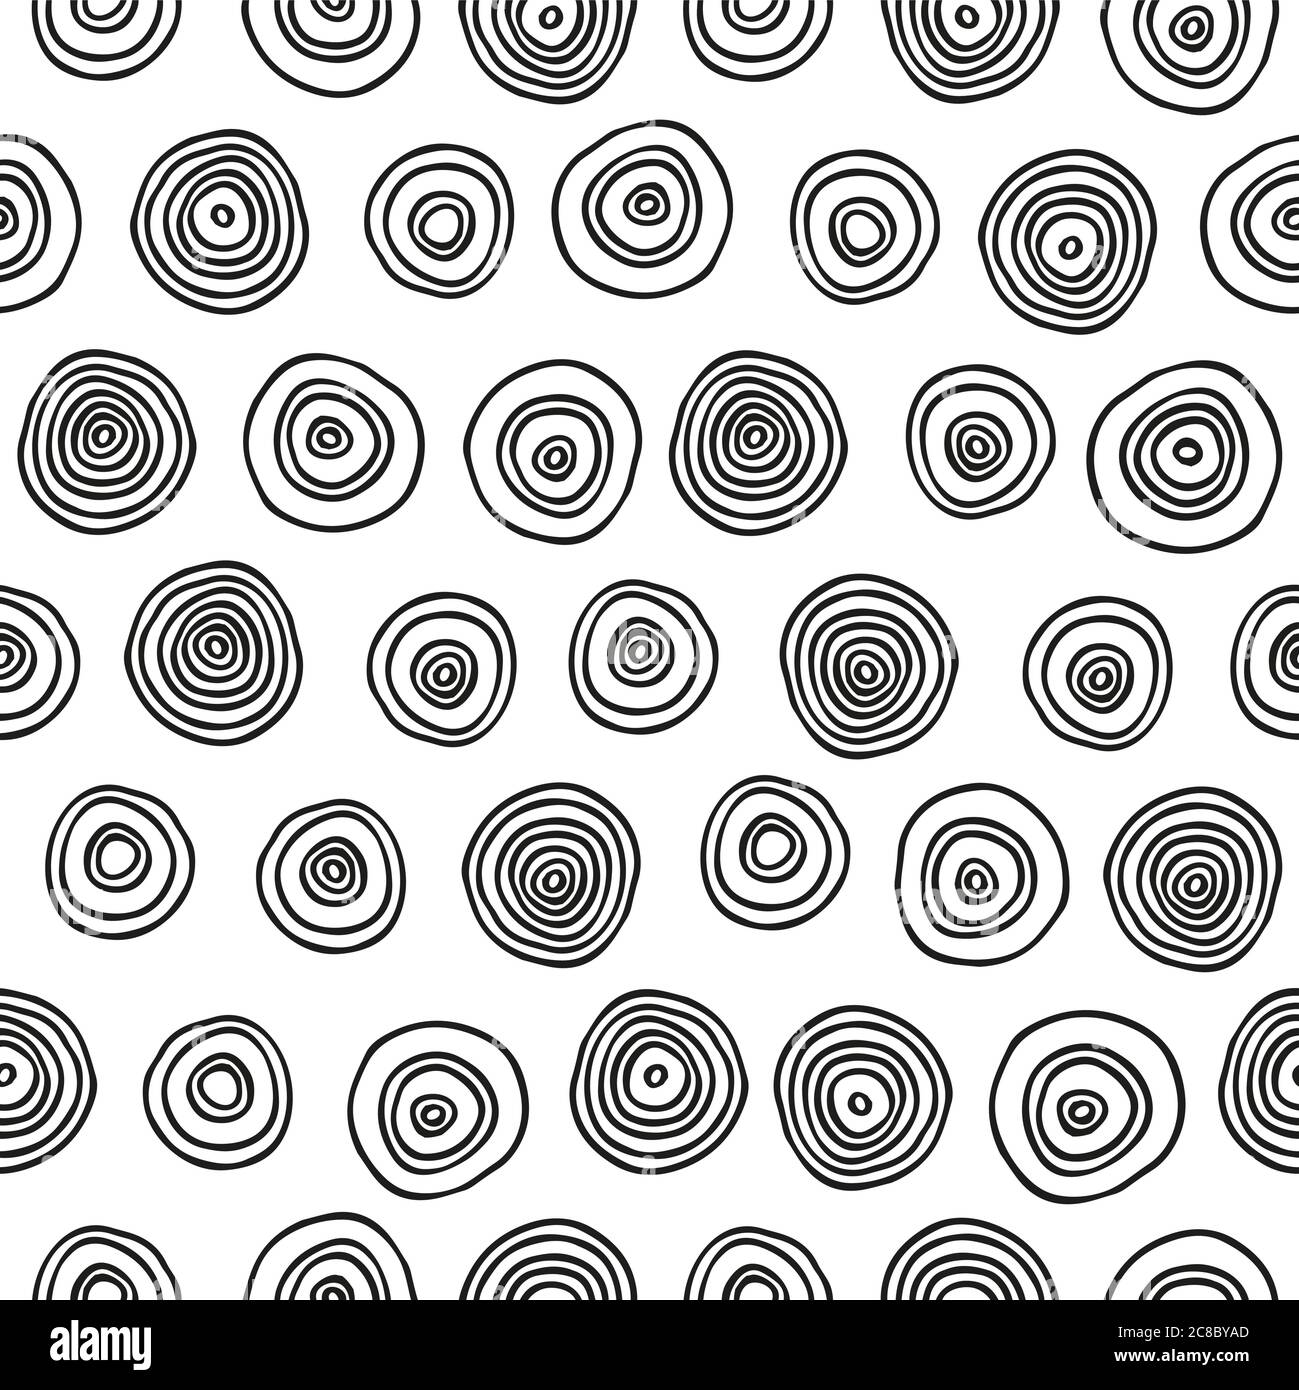 Doodle Dots Seamless Pattern. Sketchy Hand Drawn graphic print. Black and white dotted background. Grungy painted ornament. Vector illustration. Stock Vector